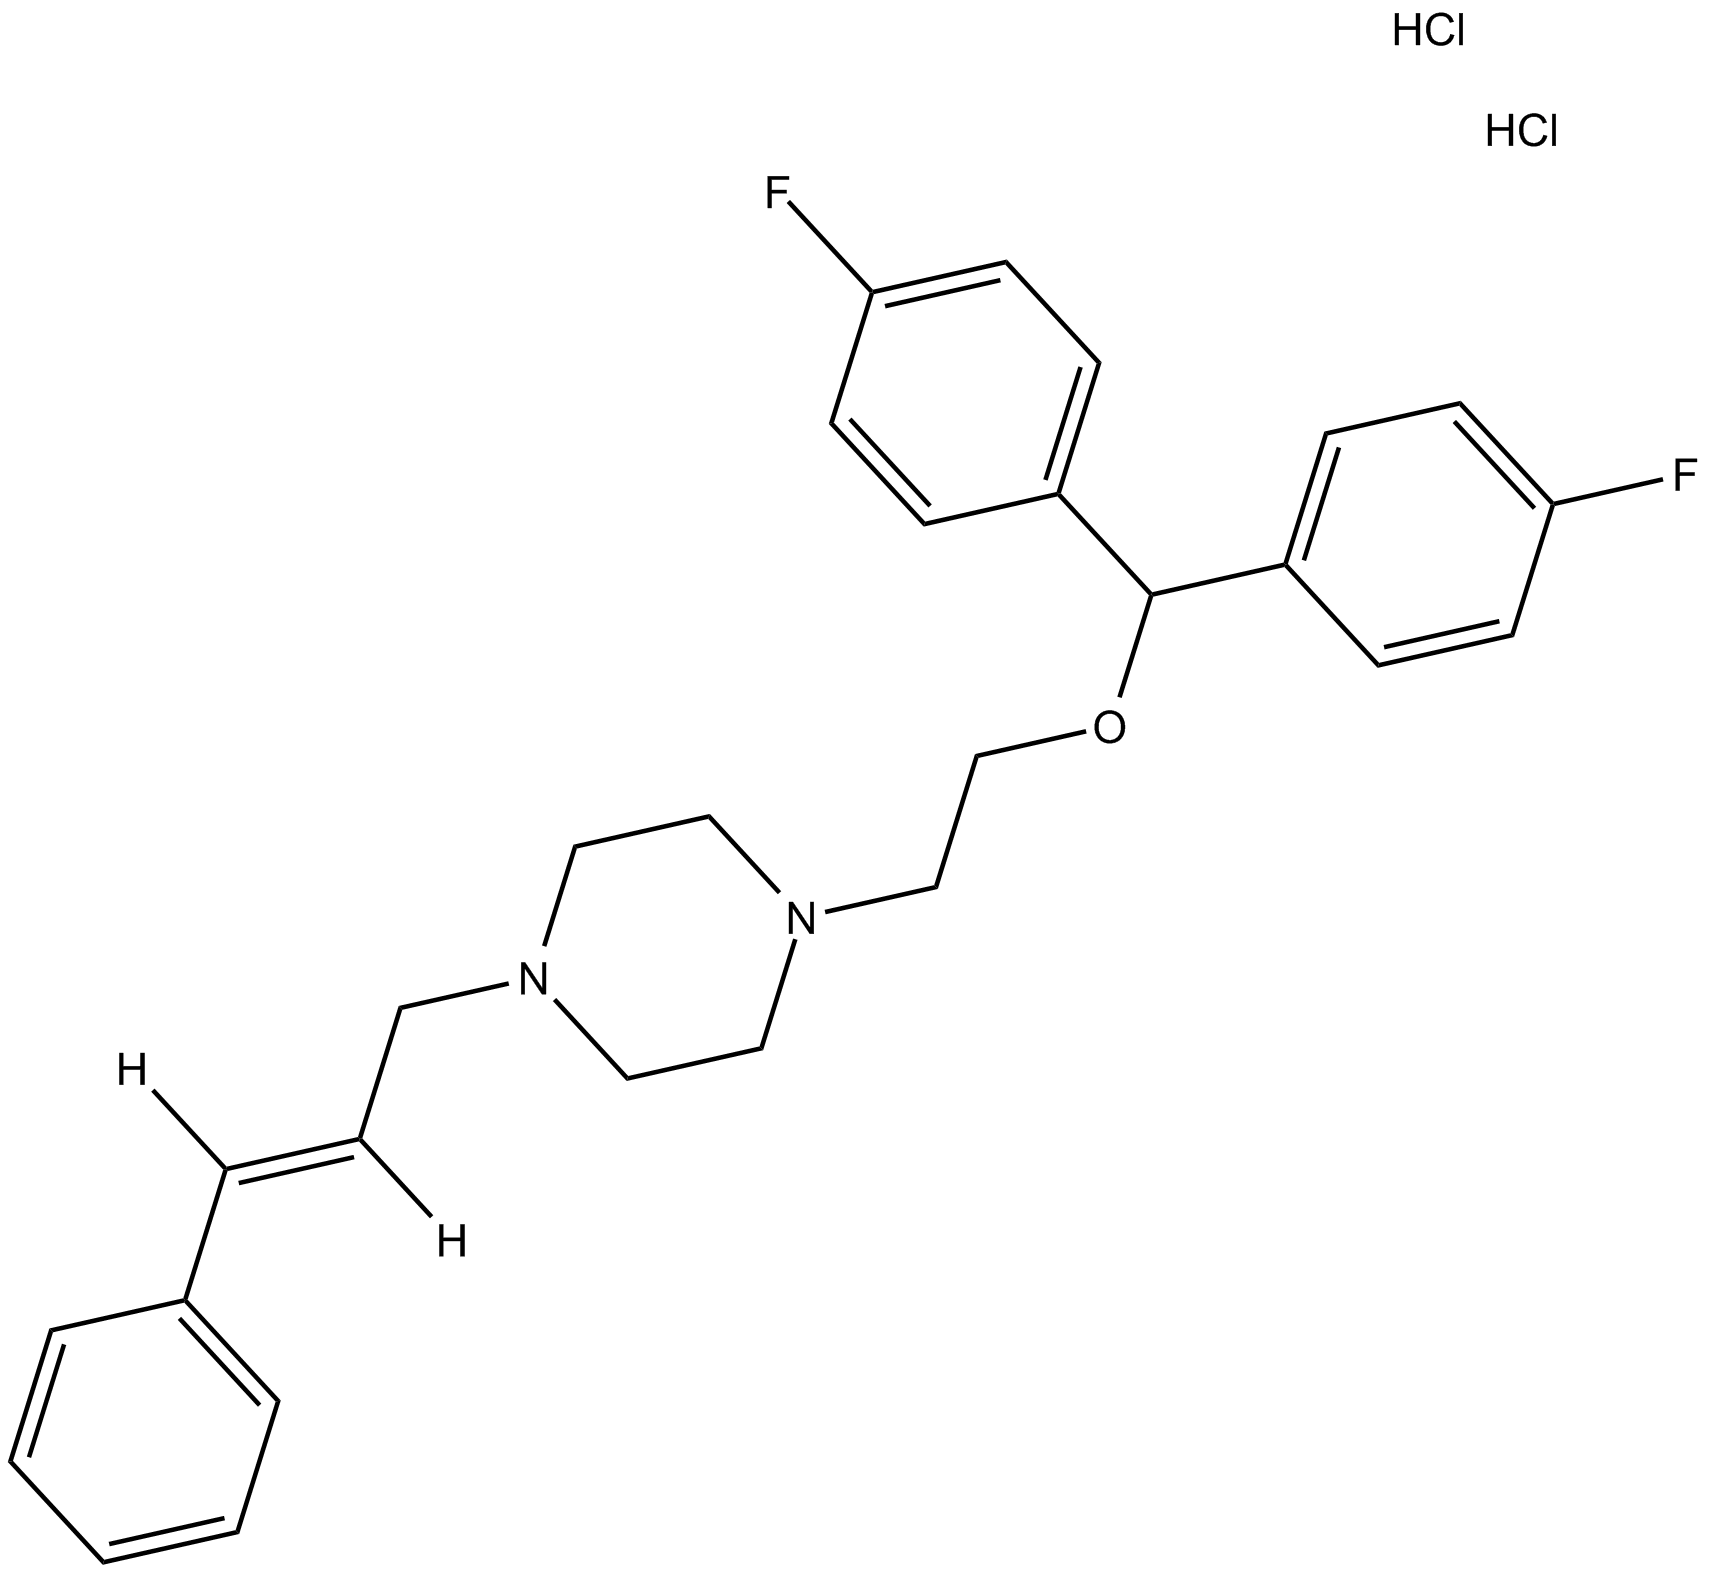 GBR 13069 dihydrochloride  Chemical Structure